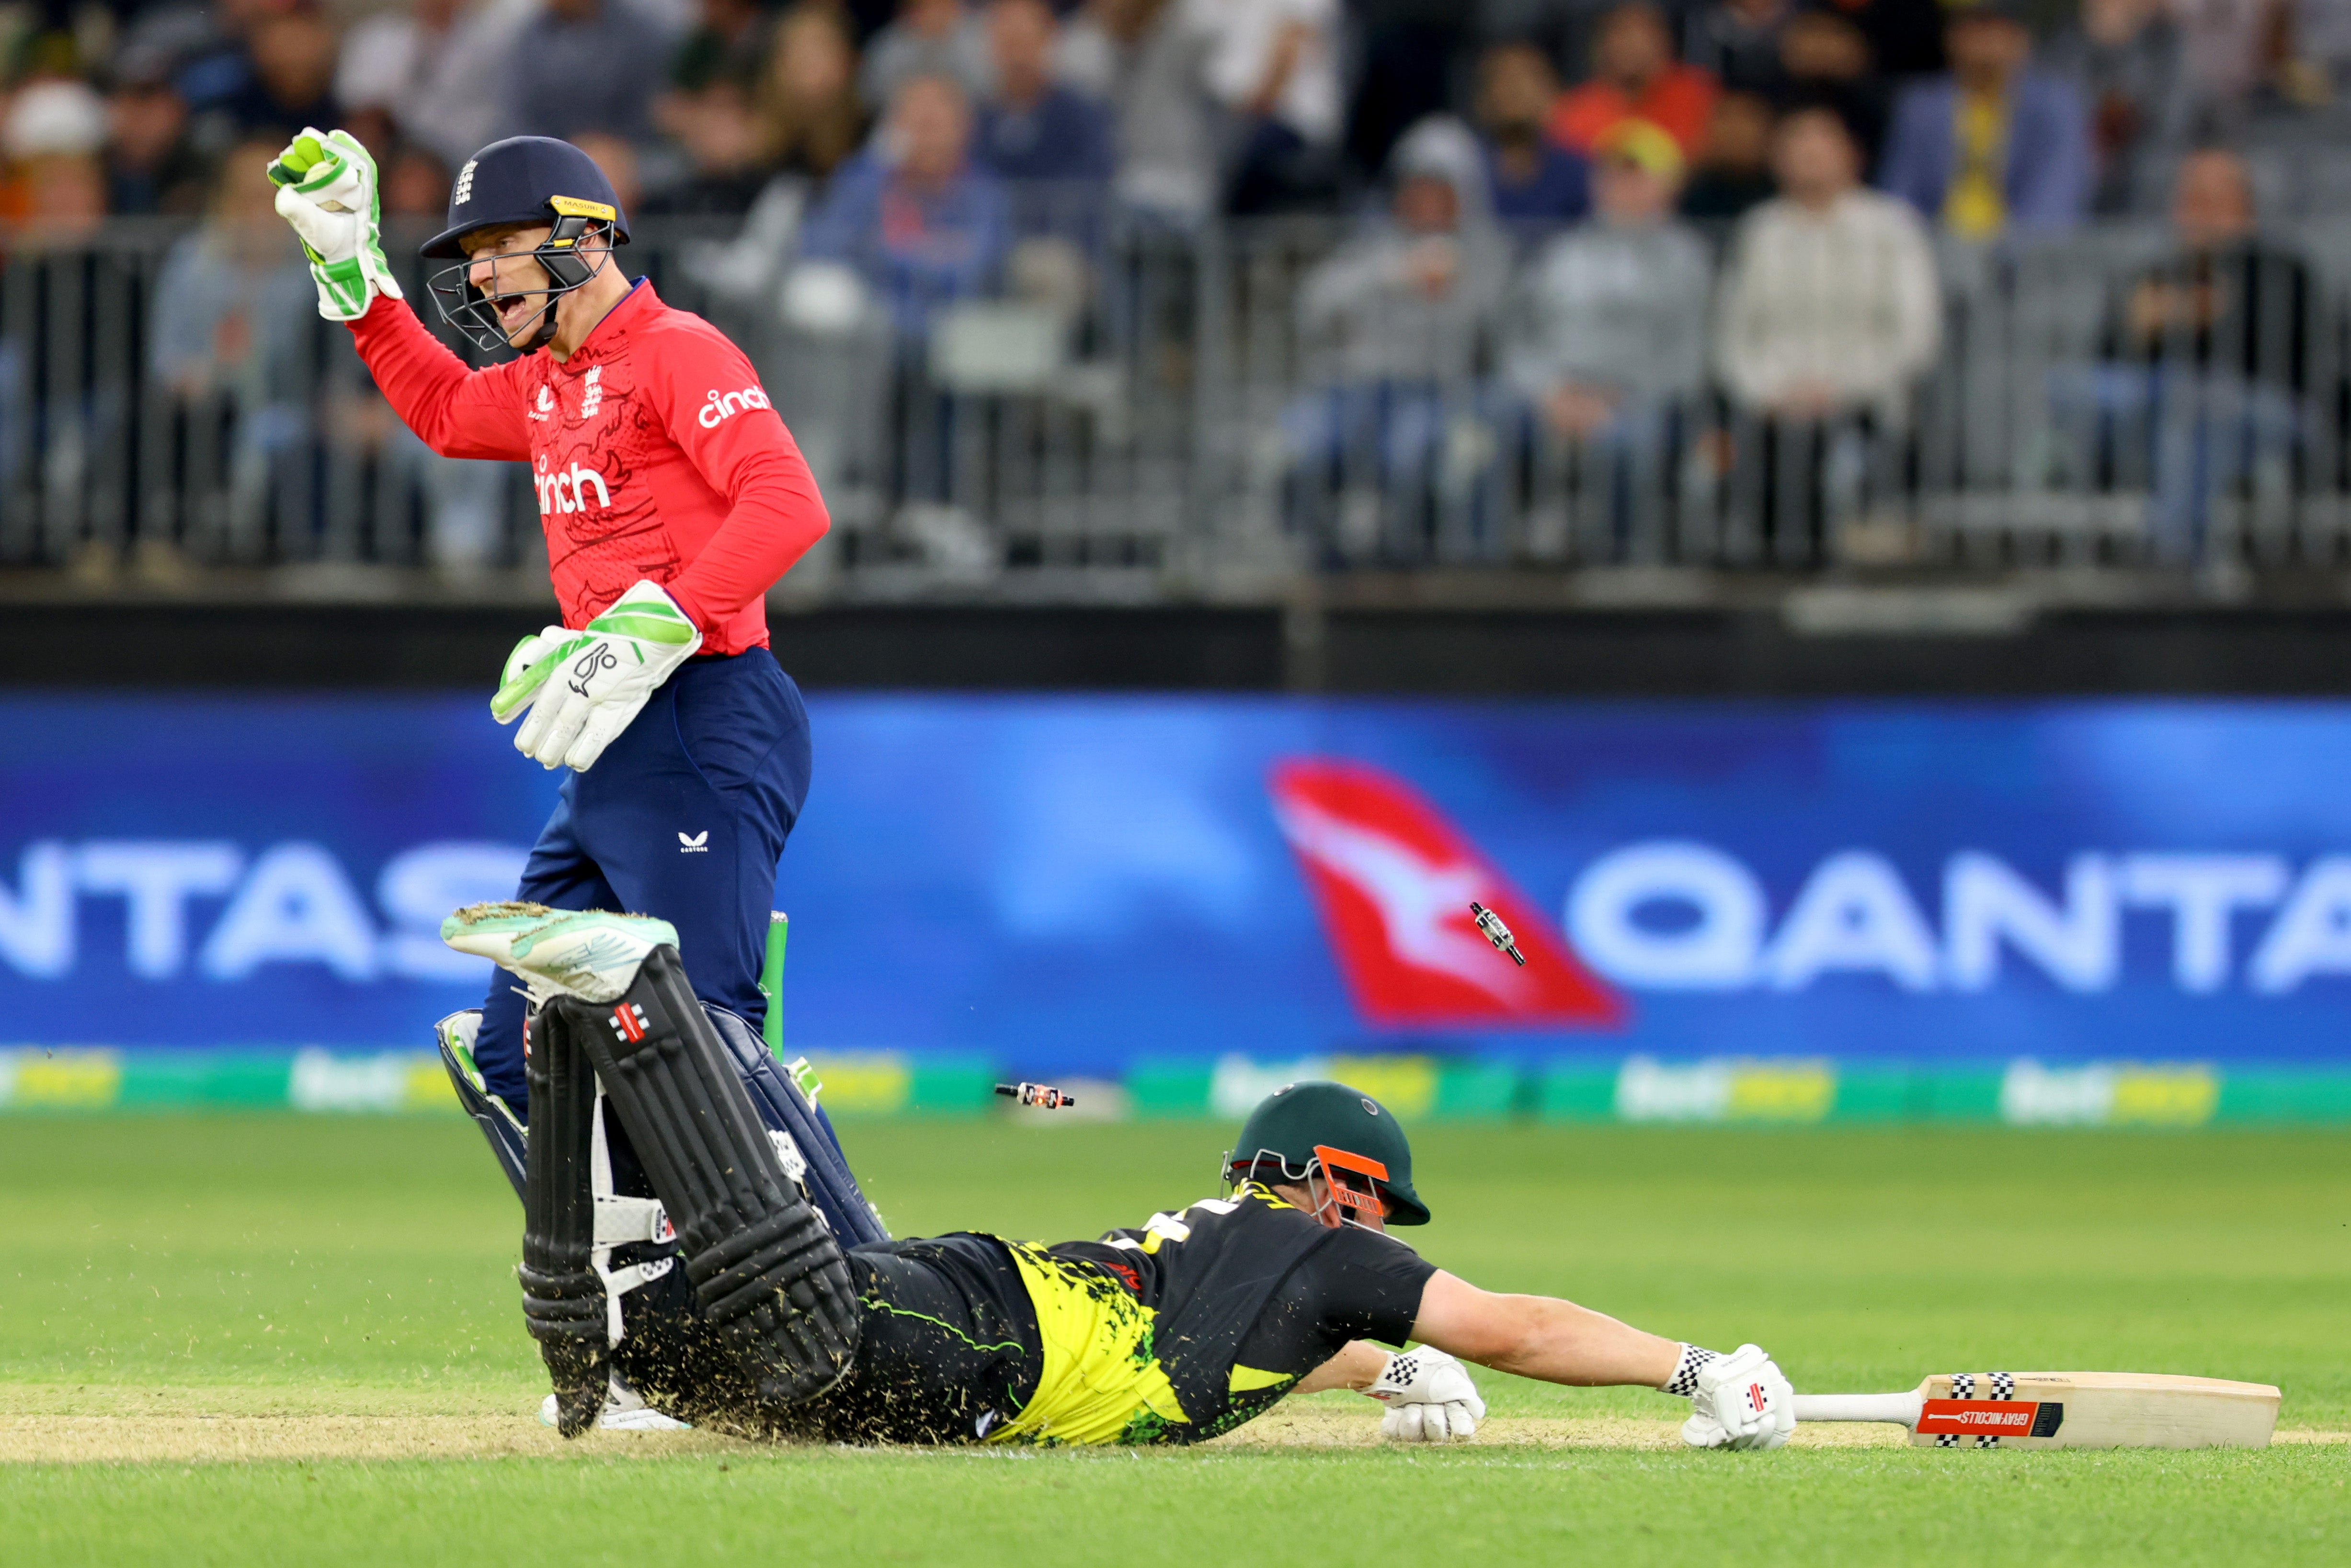 England vs Australia live stream How to watch T20 World Cup fixture online and on TV The Independent